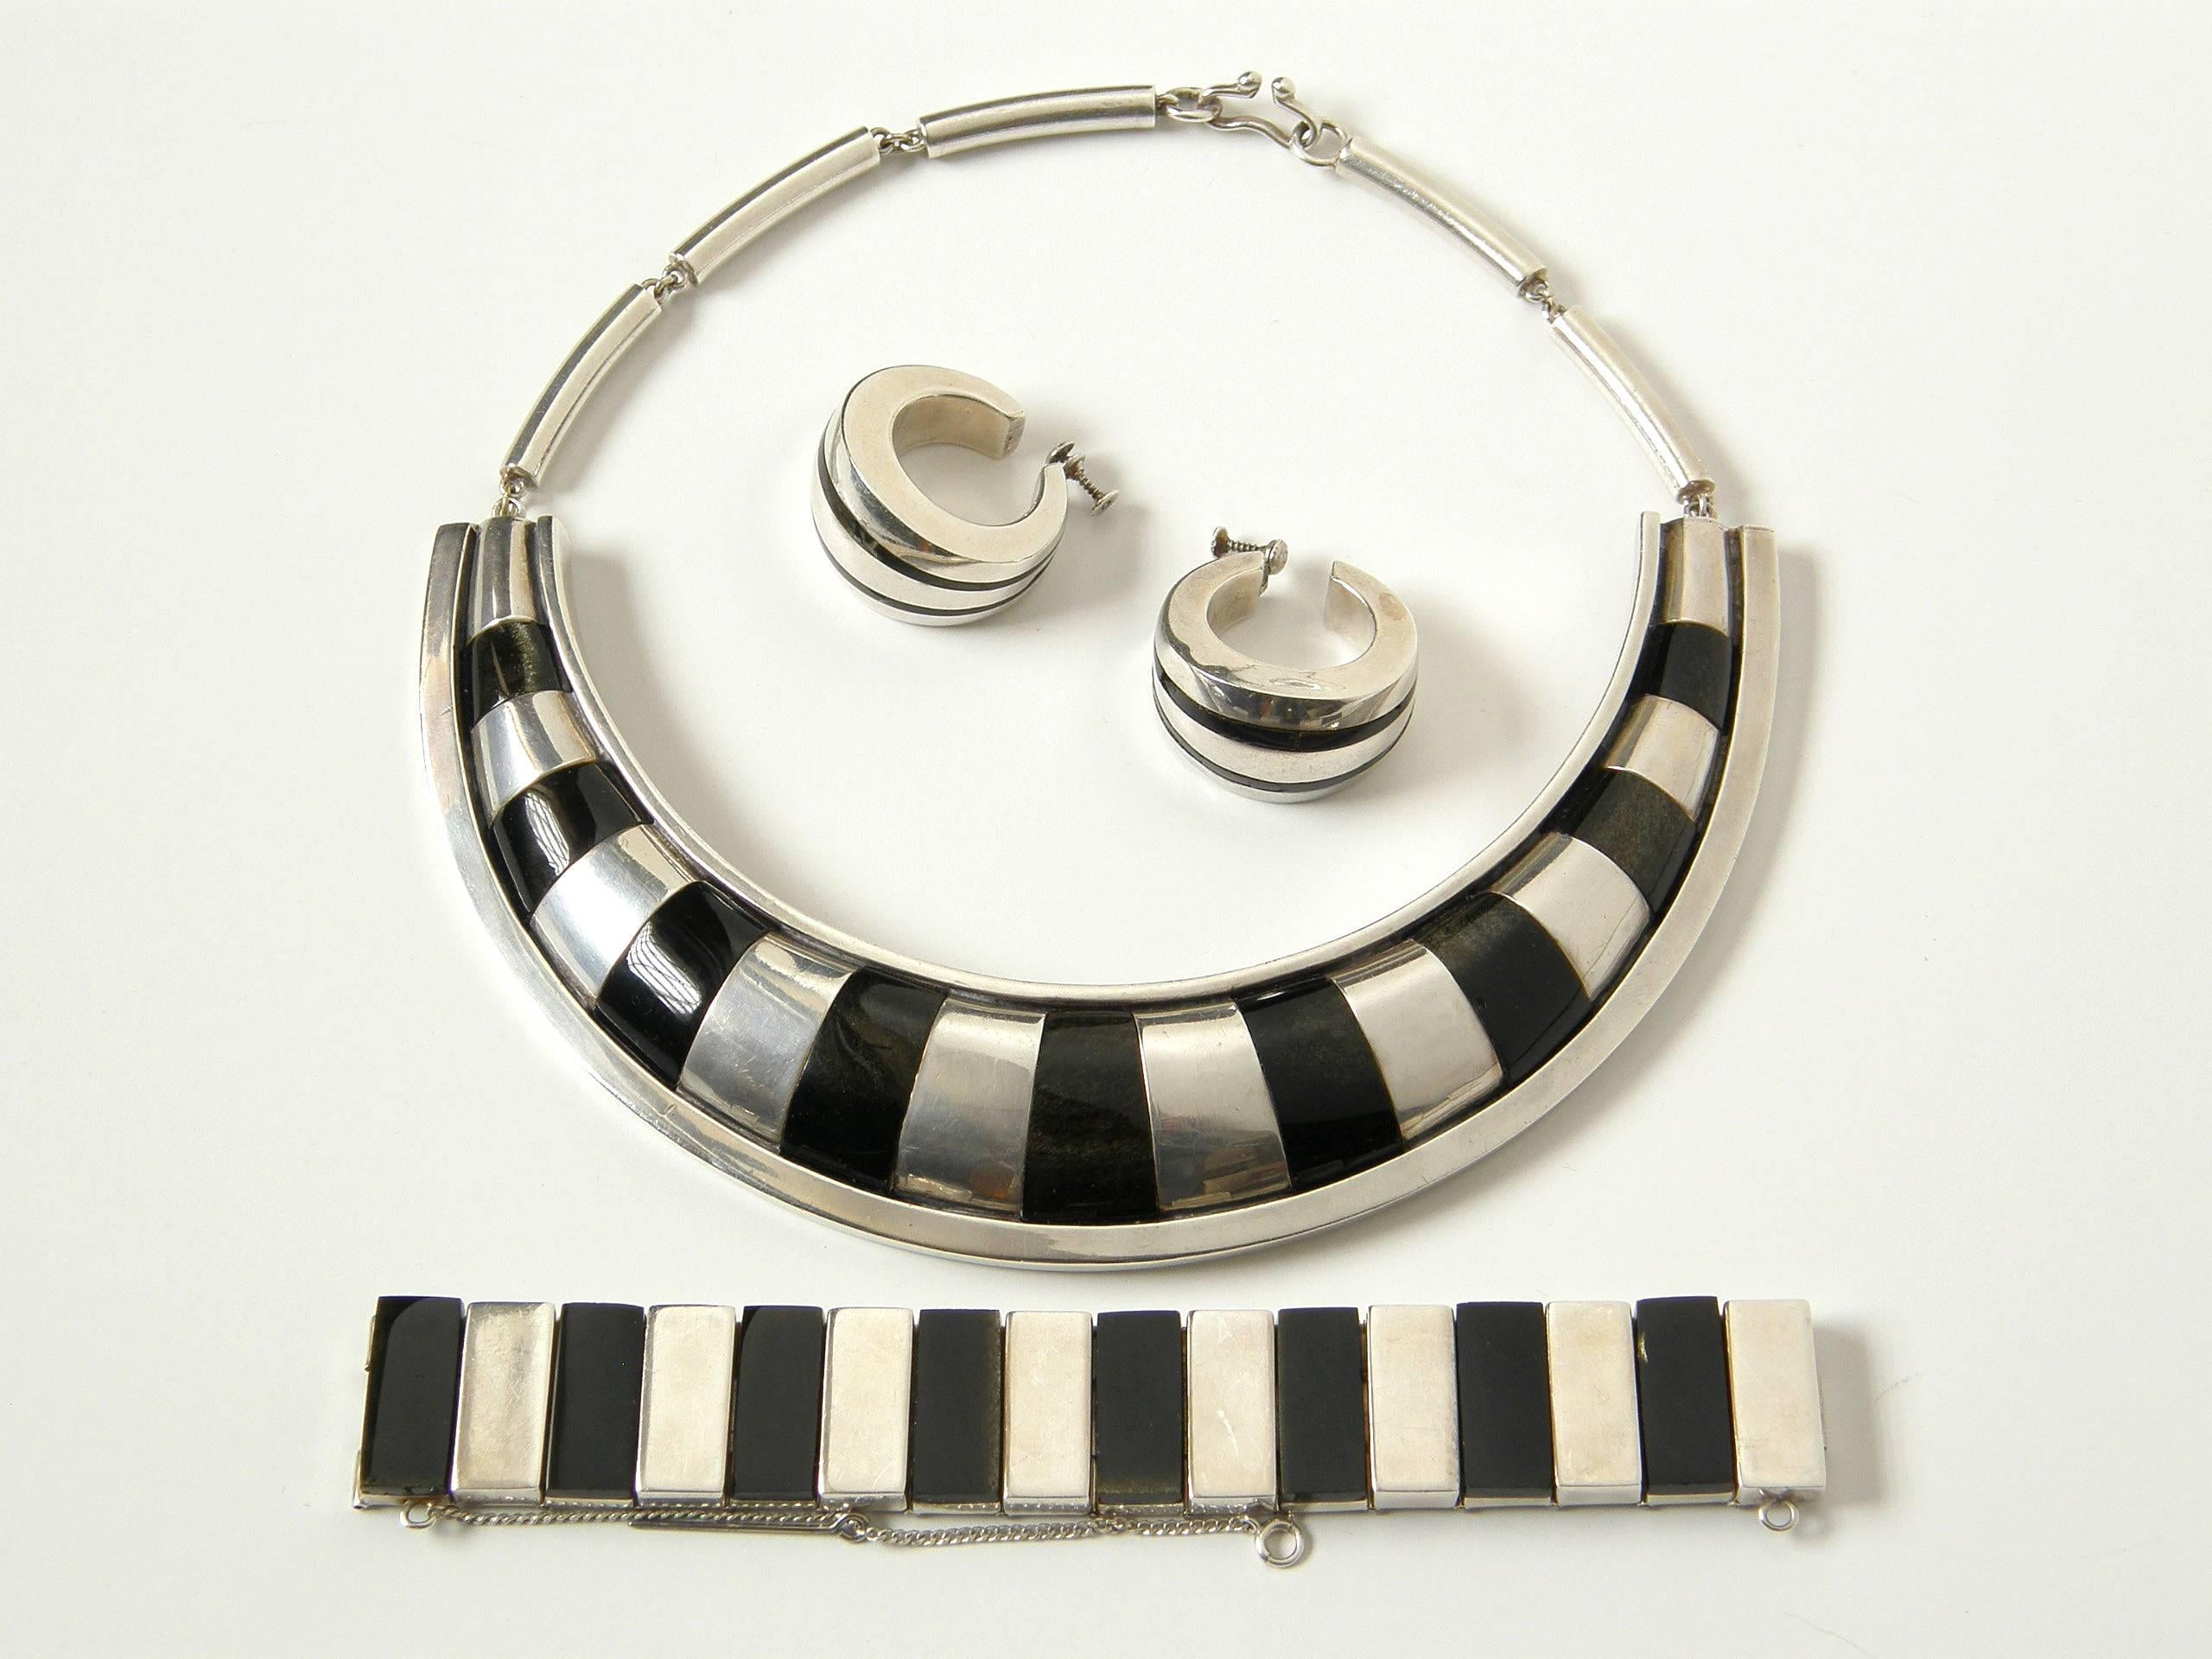 Striking necklace, bracelet and earrings set from Piedra Y Plata, the Taxco silver workshop of Felipe Martinez. The geometric designs utilize the contrast between the sterling and the obsidian to great effect. Being a three piece parure, they make a